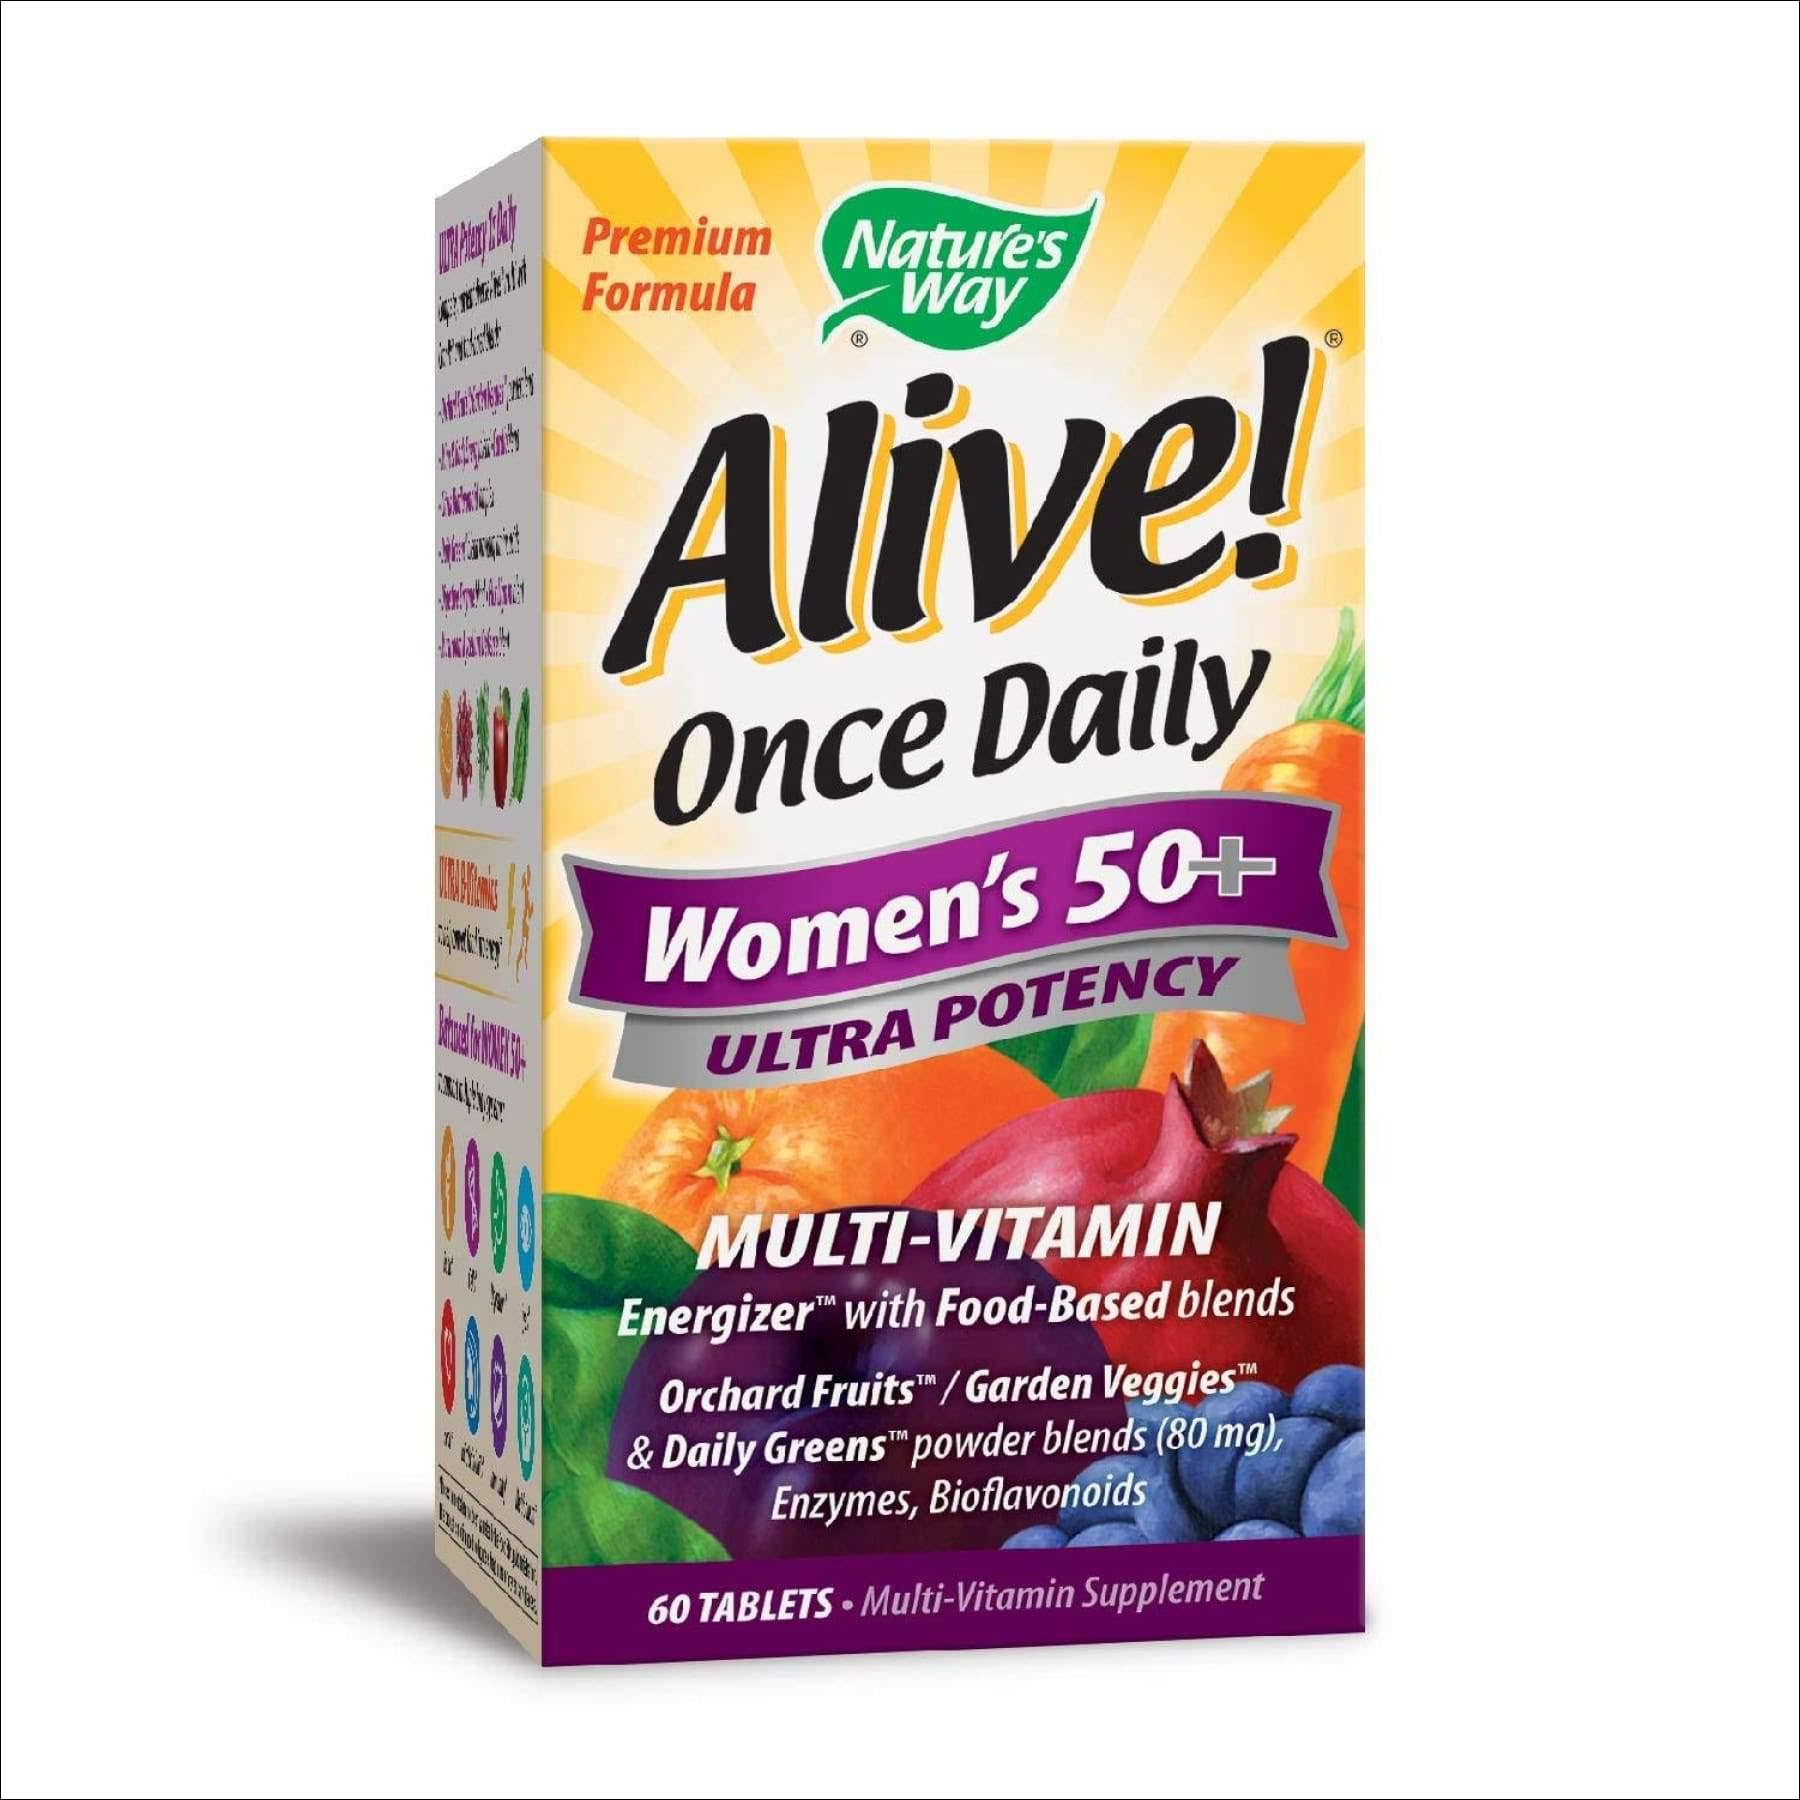 Nature's Way Alive! Once Daily Women's 50+ Ultra Potency Multivitamin - 60 tablets